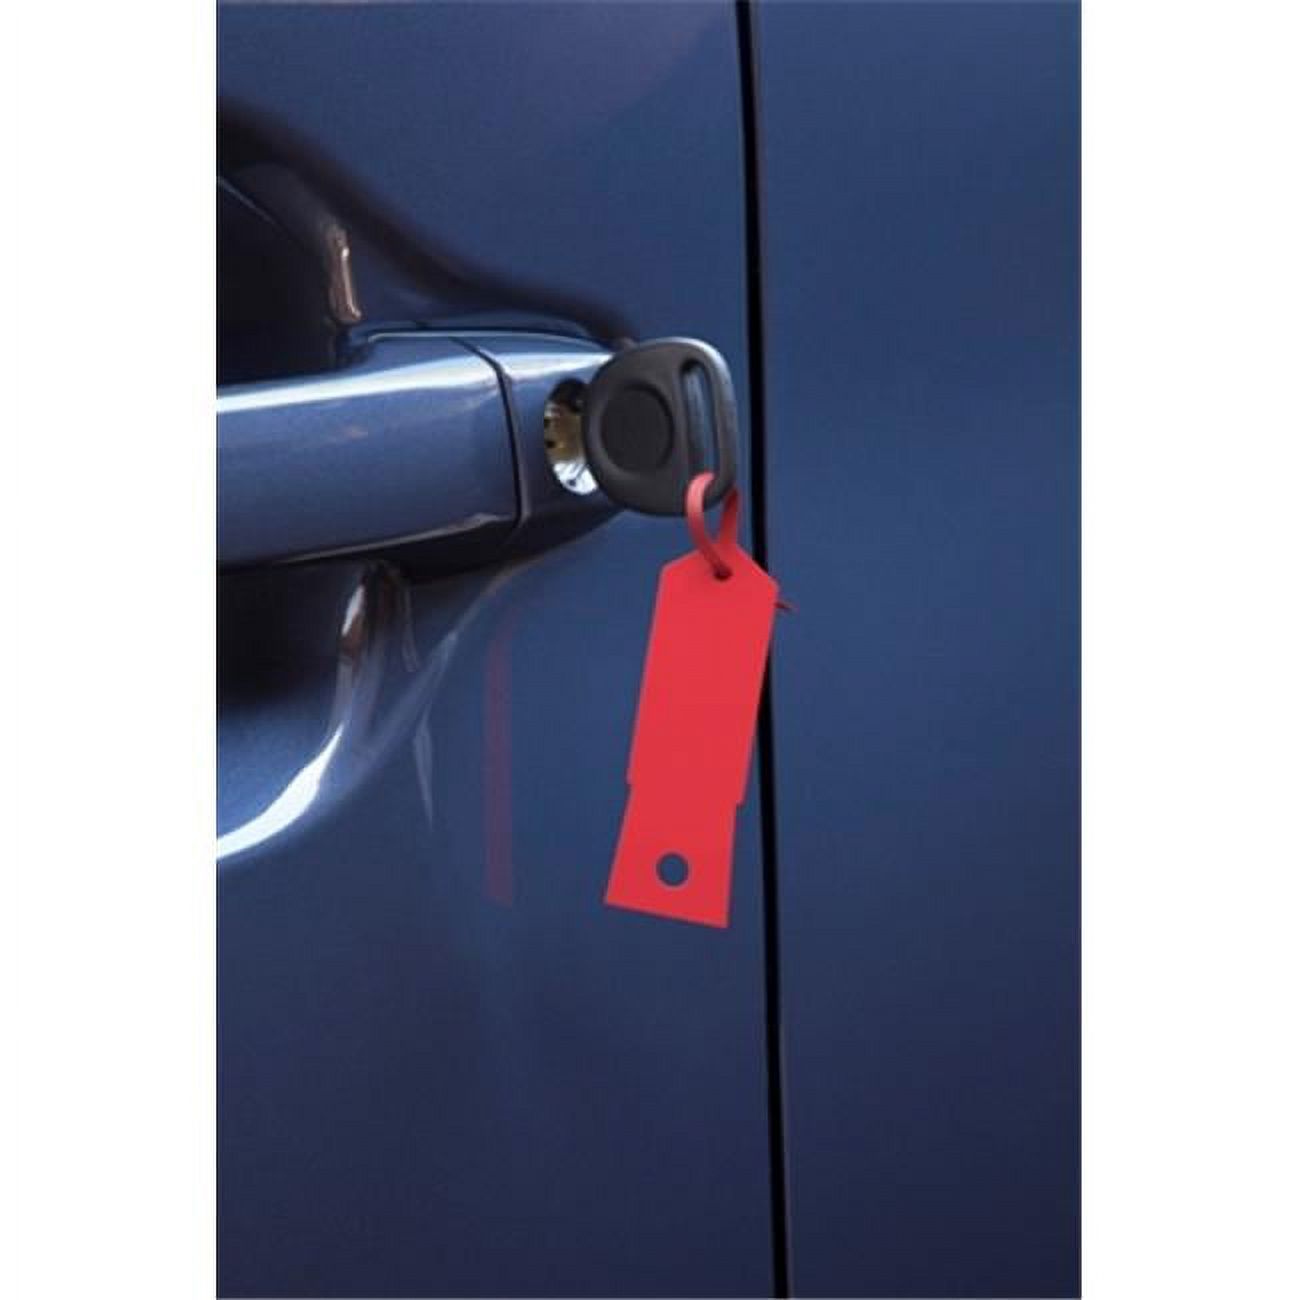 Petoskey Fb-P9933-99 Red Key Tag - 1000 Package - image 1 of 1